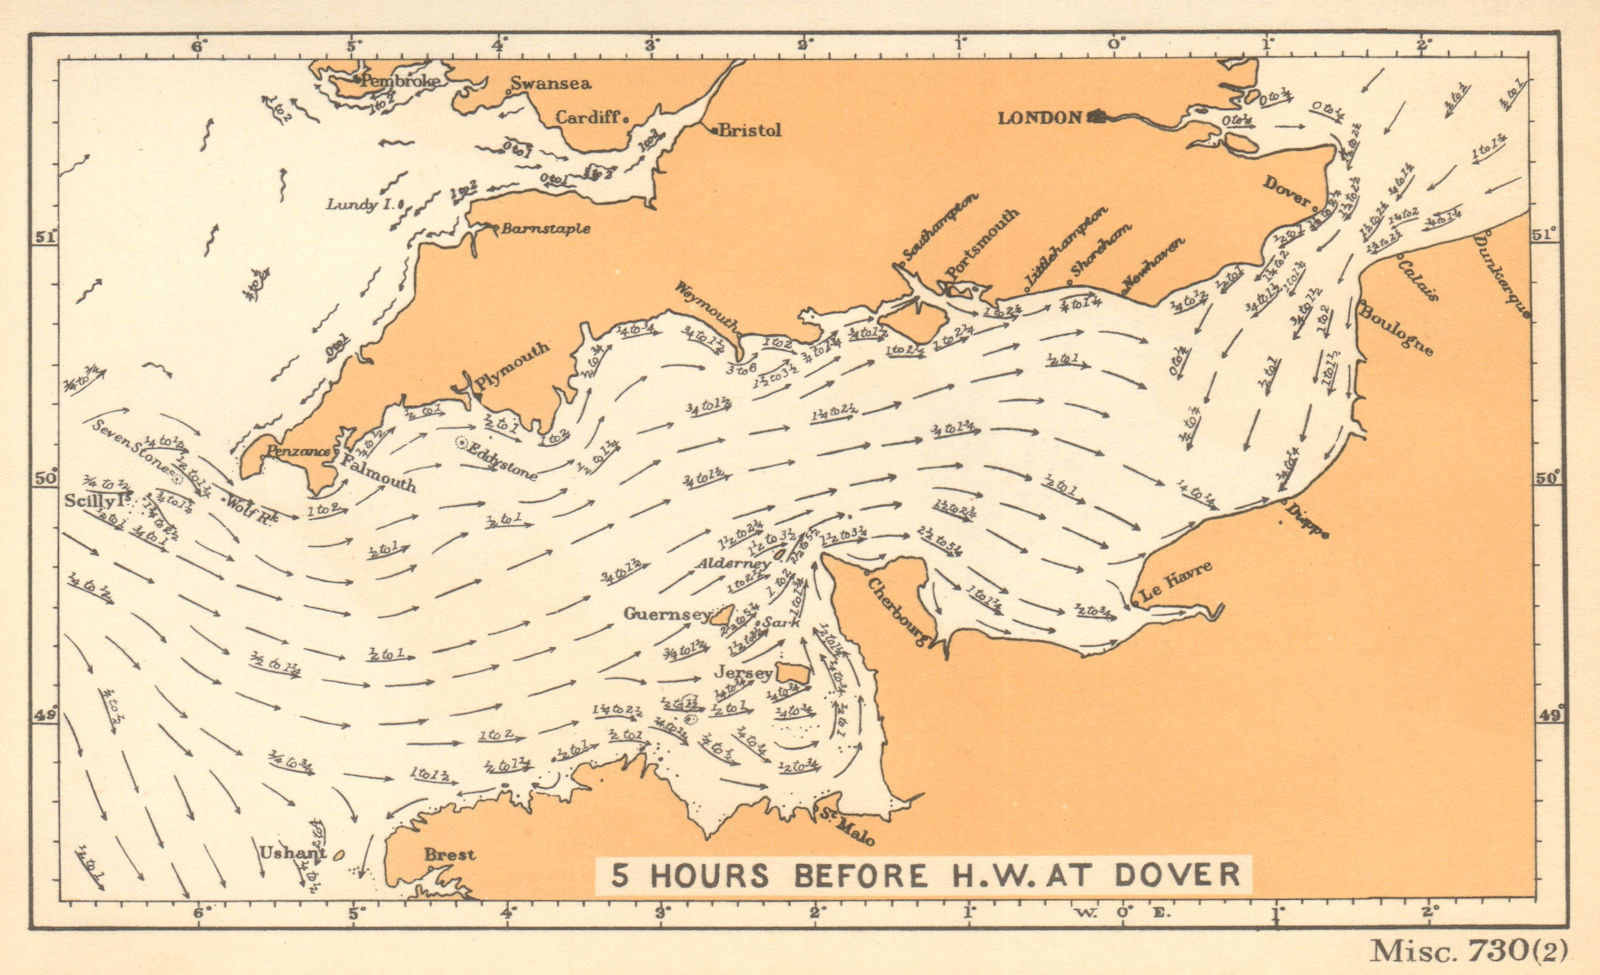 English Channel currents 5 hours before high water at Dover. ADMIRALTY 1943 map